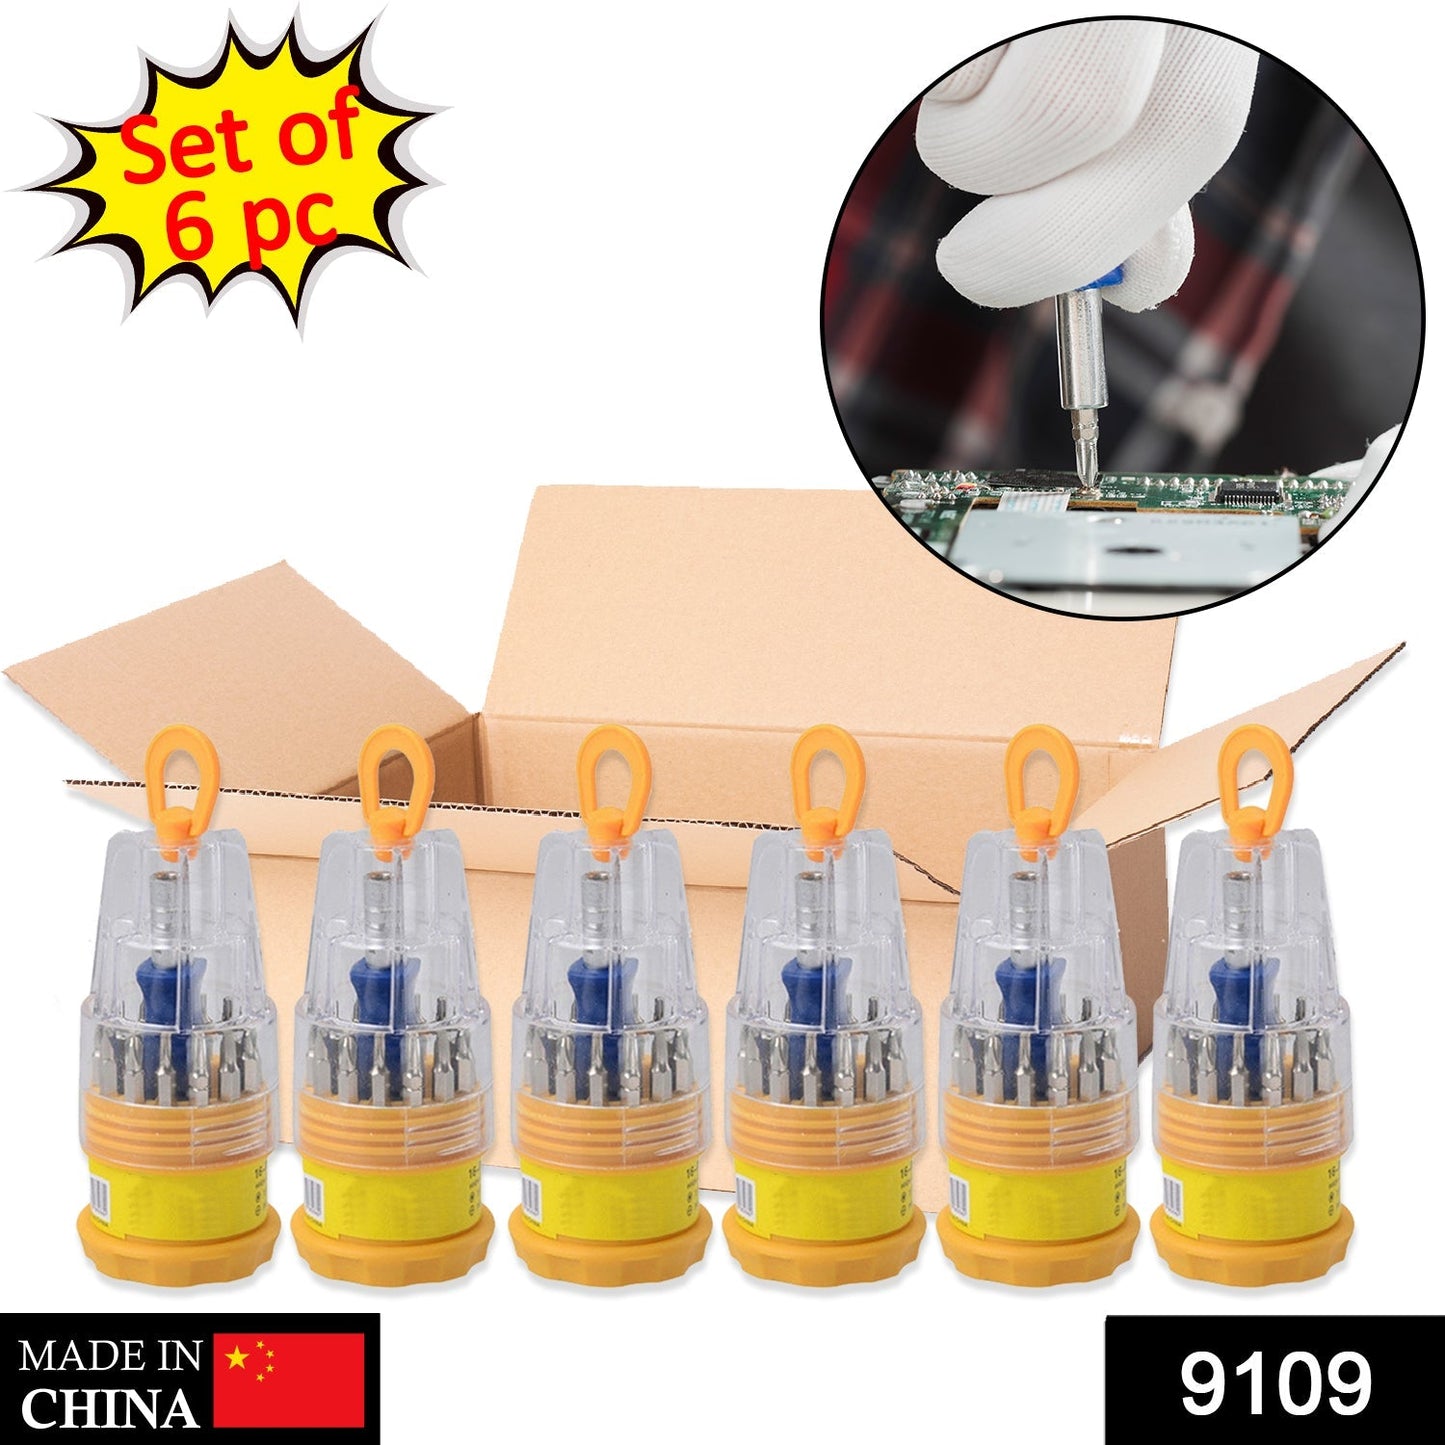 9109 (Set of 6pc) Screwdriver Set, Steel 16 in 1 with 15 Screwdriver Bits, Professional Magnetic Driver Set DeoDap